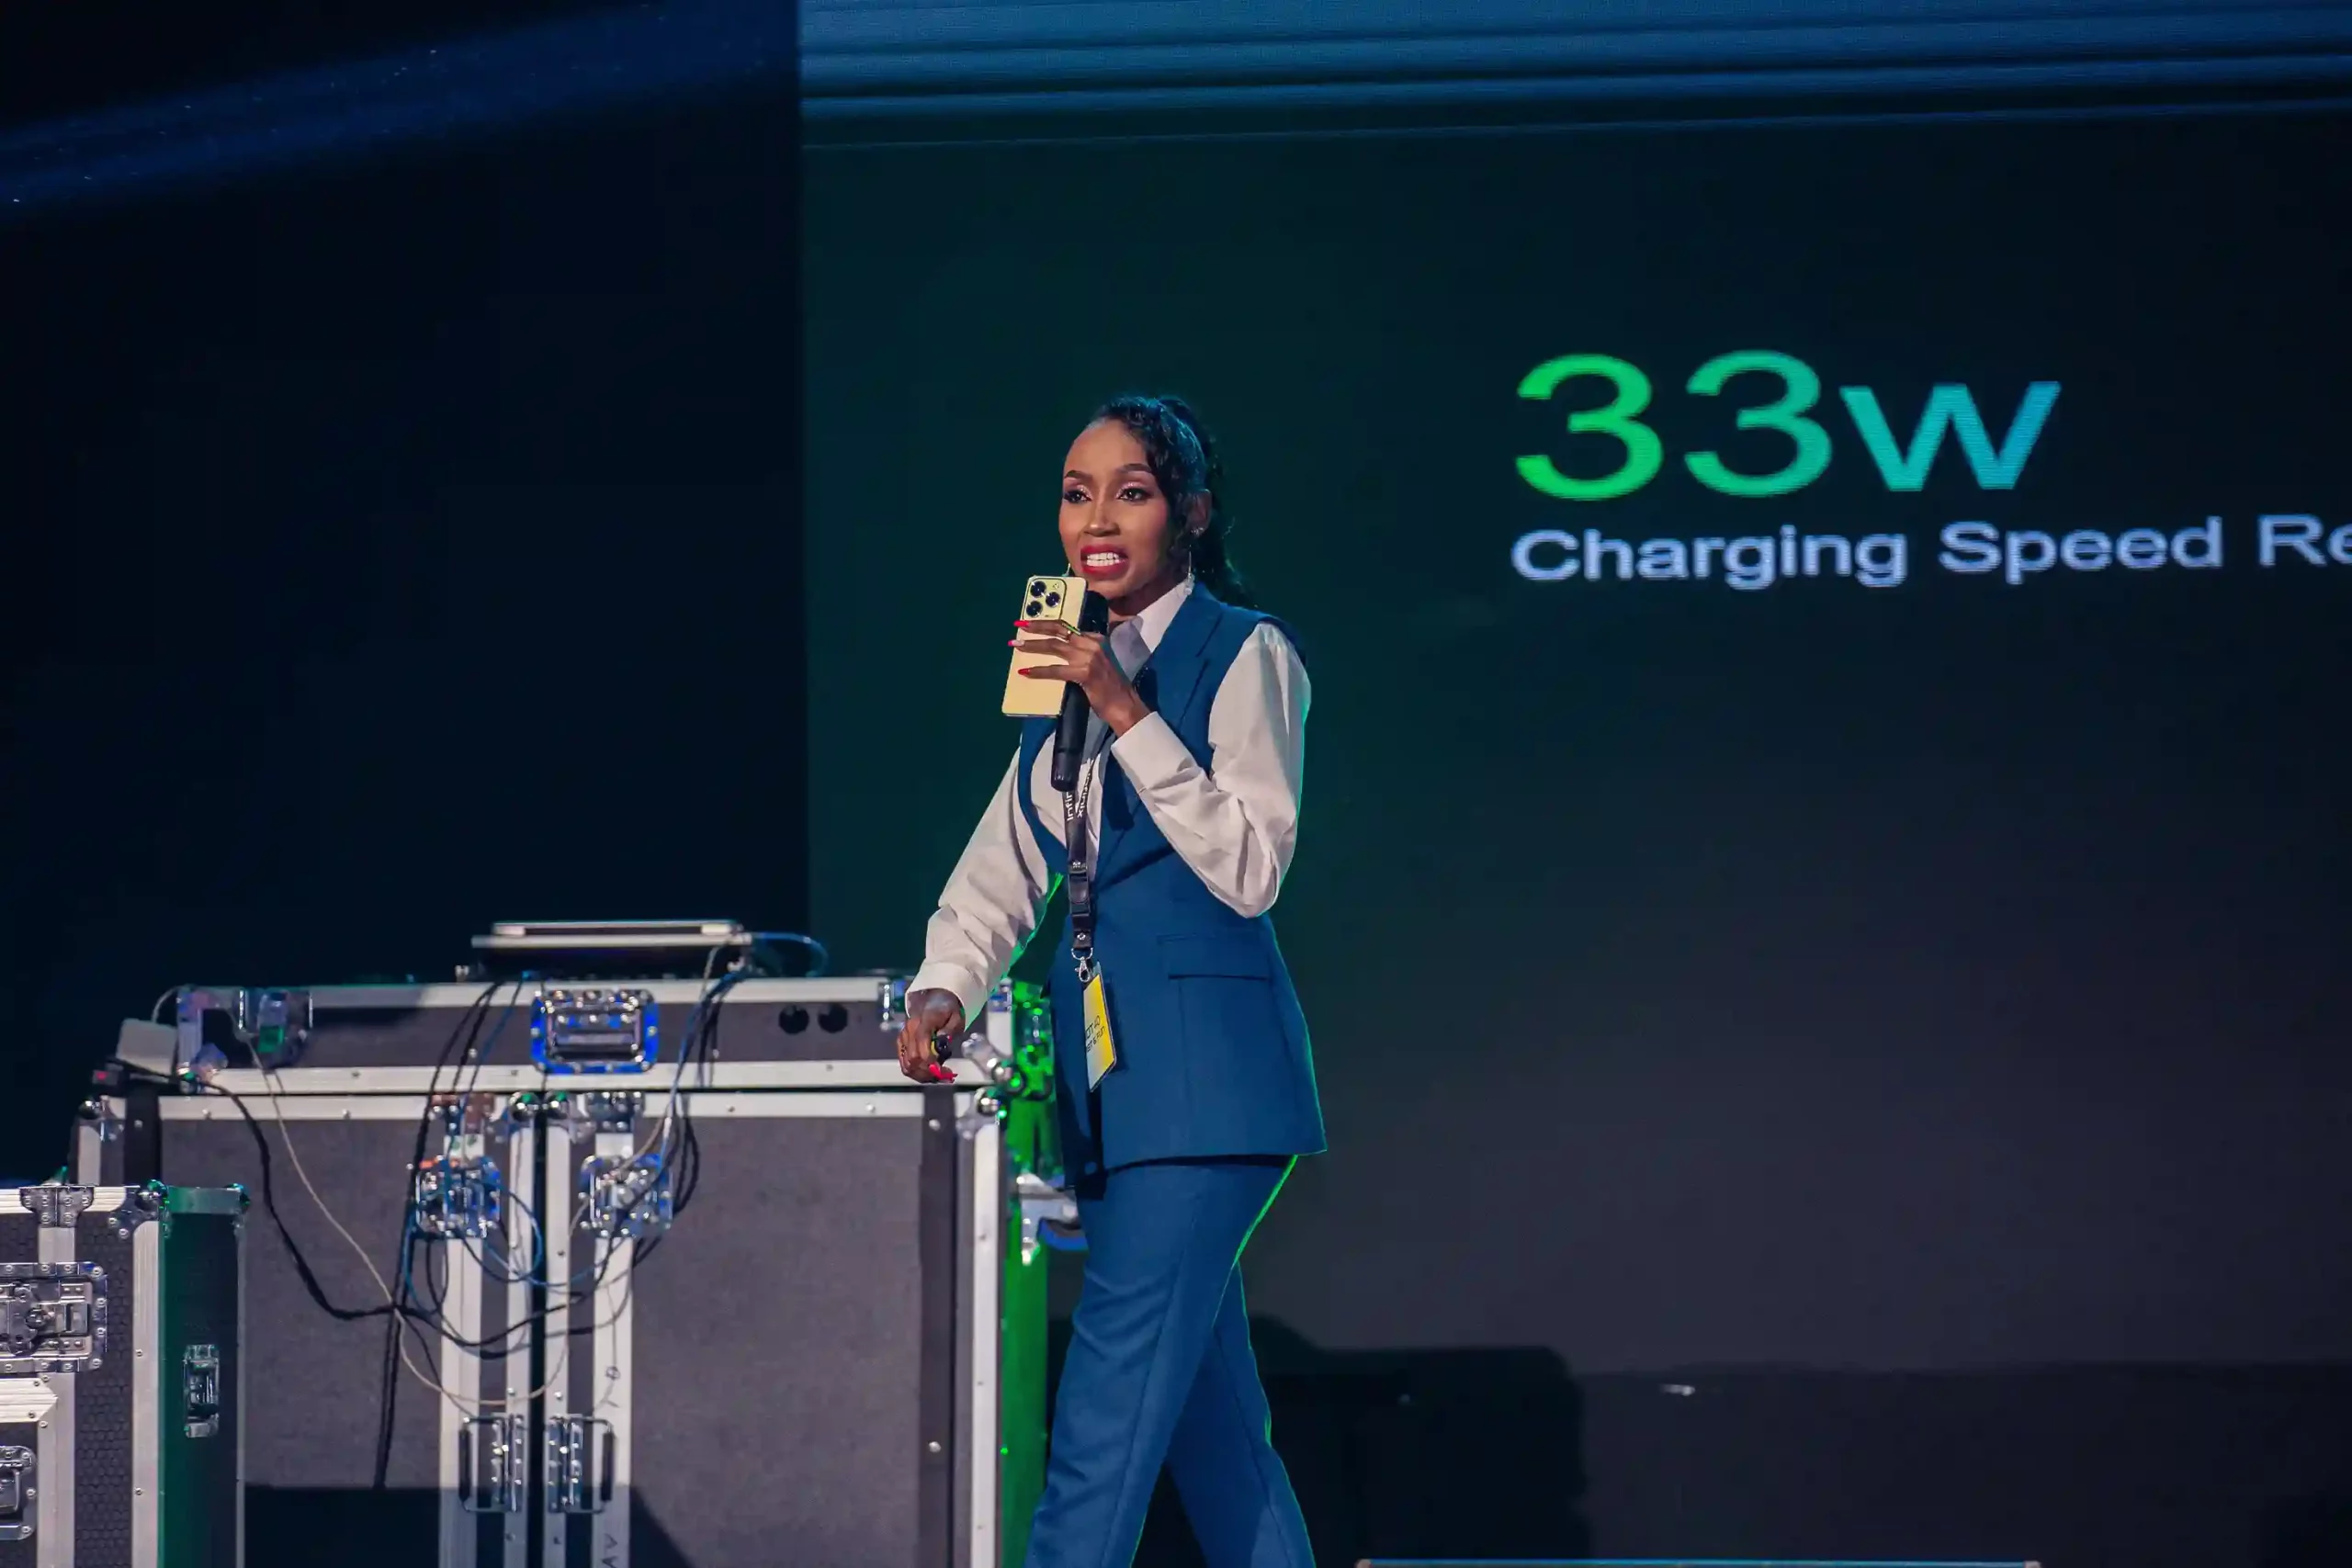 Cynthia Njiru Infinix Kenya PR speaking during the launch of the HOT 40 series, featuring the HOT 40 Pro, HOT 40, and HOT 40i models providing gamers of all budgets an action-packed smartphone to level up their mobile entertainment experience.